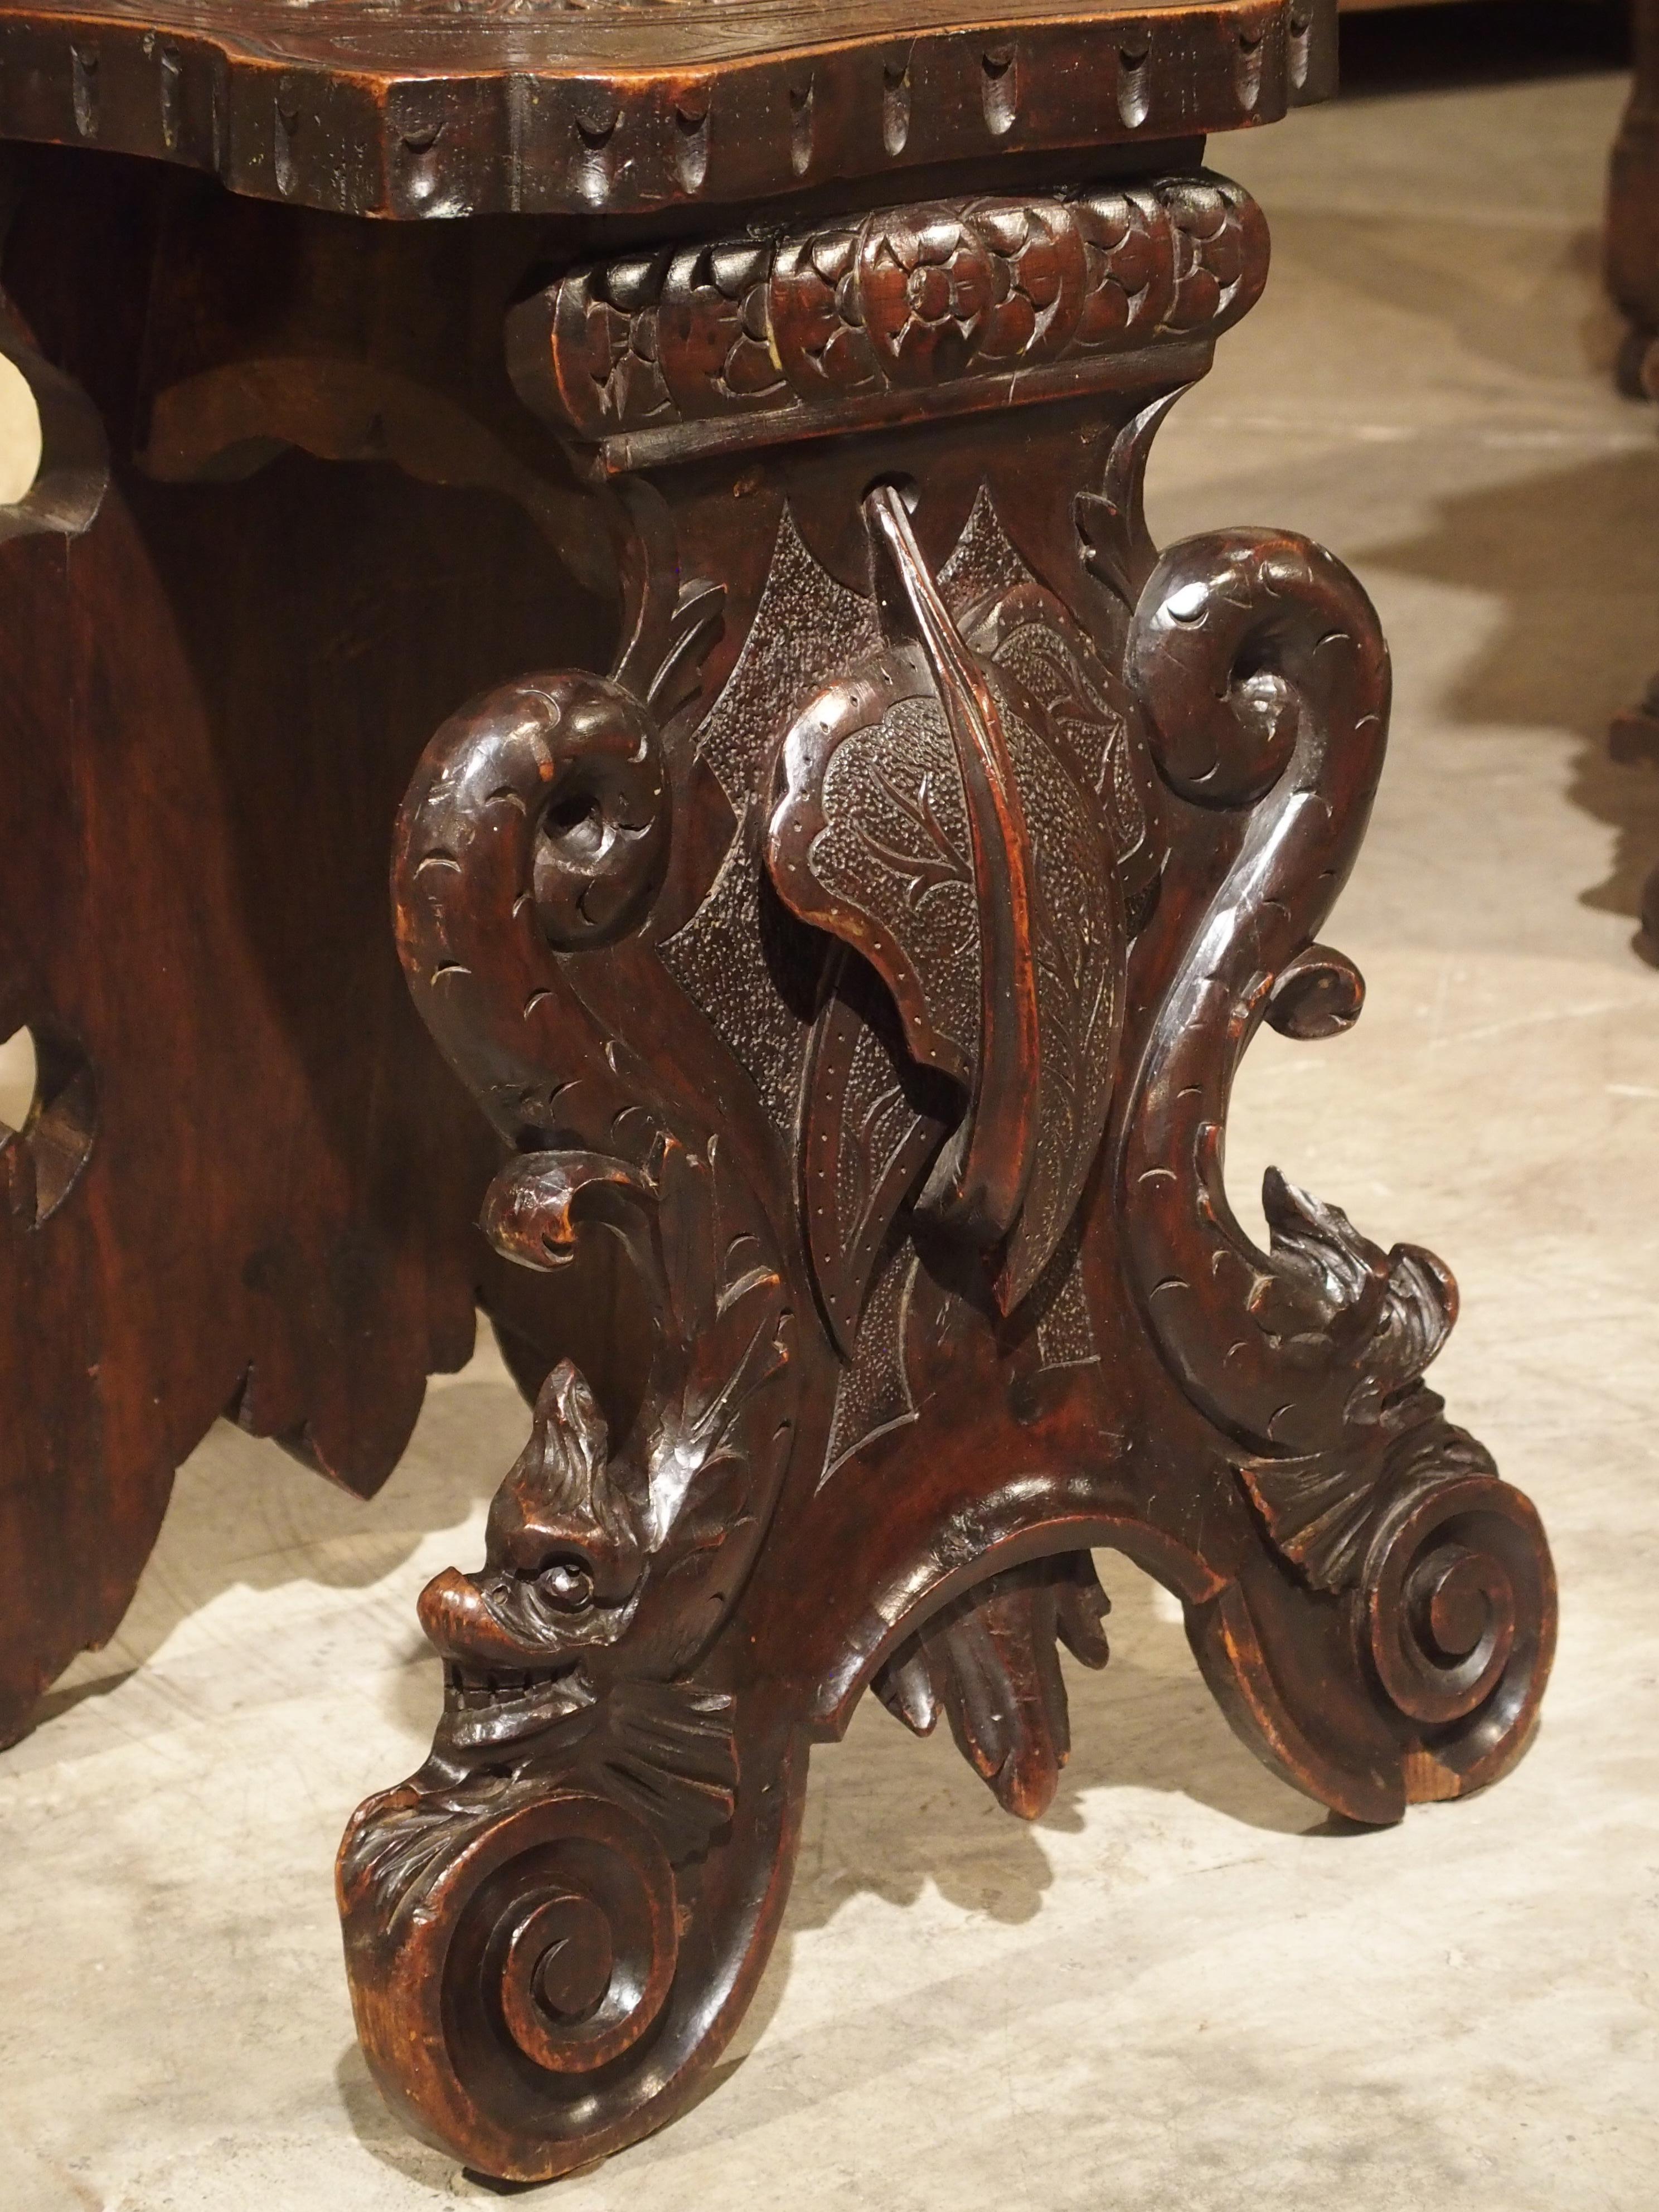 Swiss Richly Carved 19th Century Escabelle Chair from Switzerland